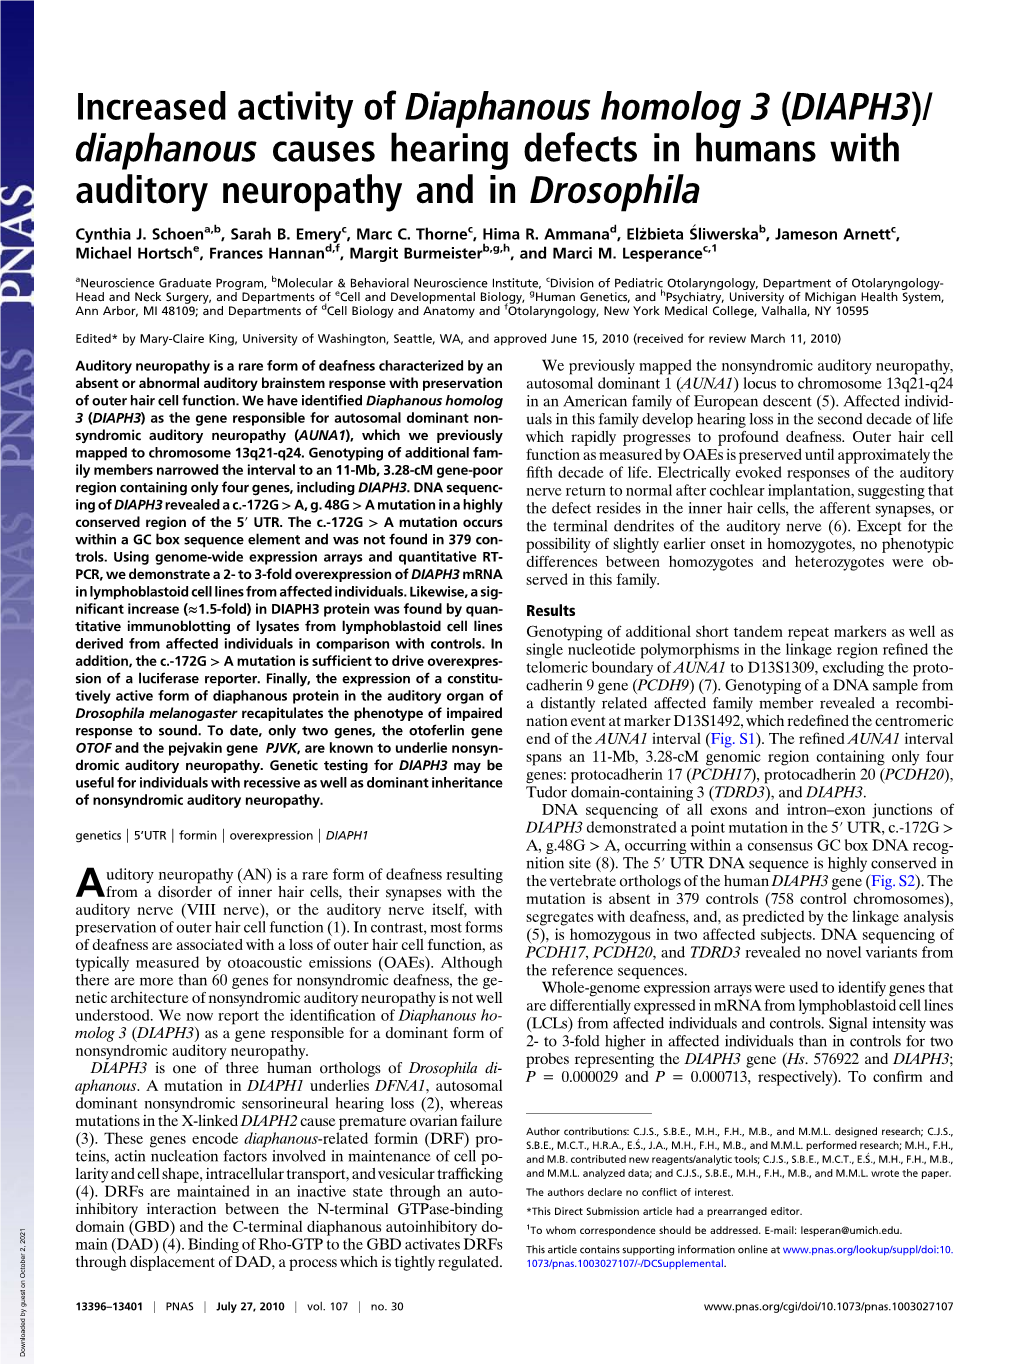 Diaphanous Causes Hearing Defects in Humans with Auditory Neuropathy and in Drosophila